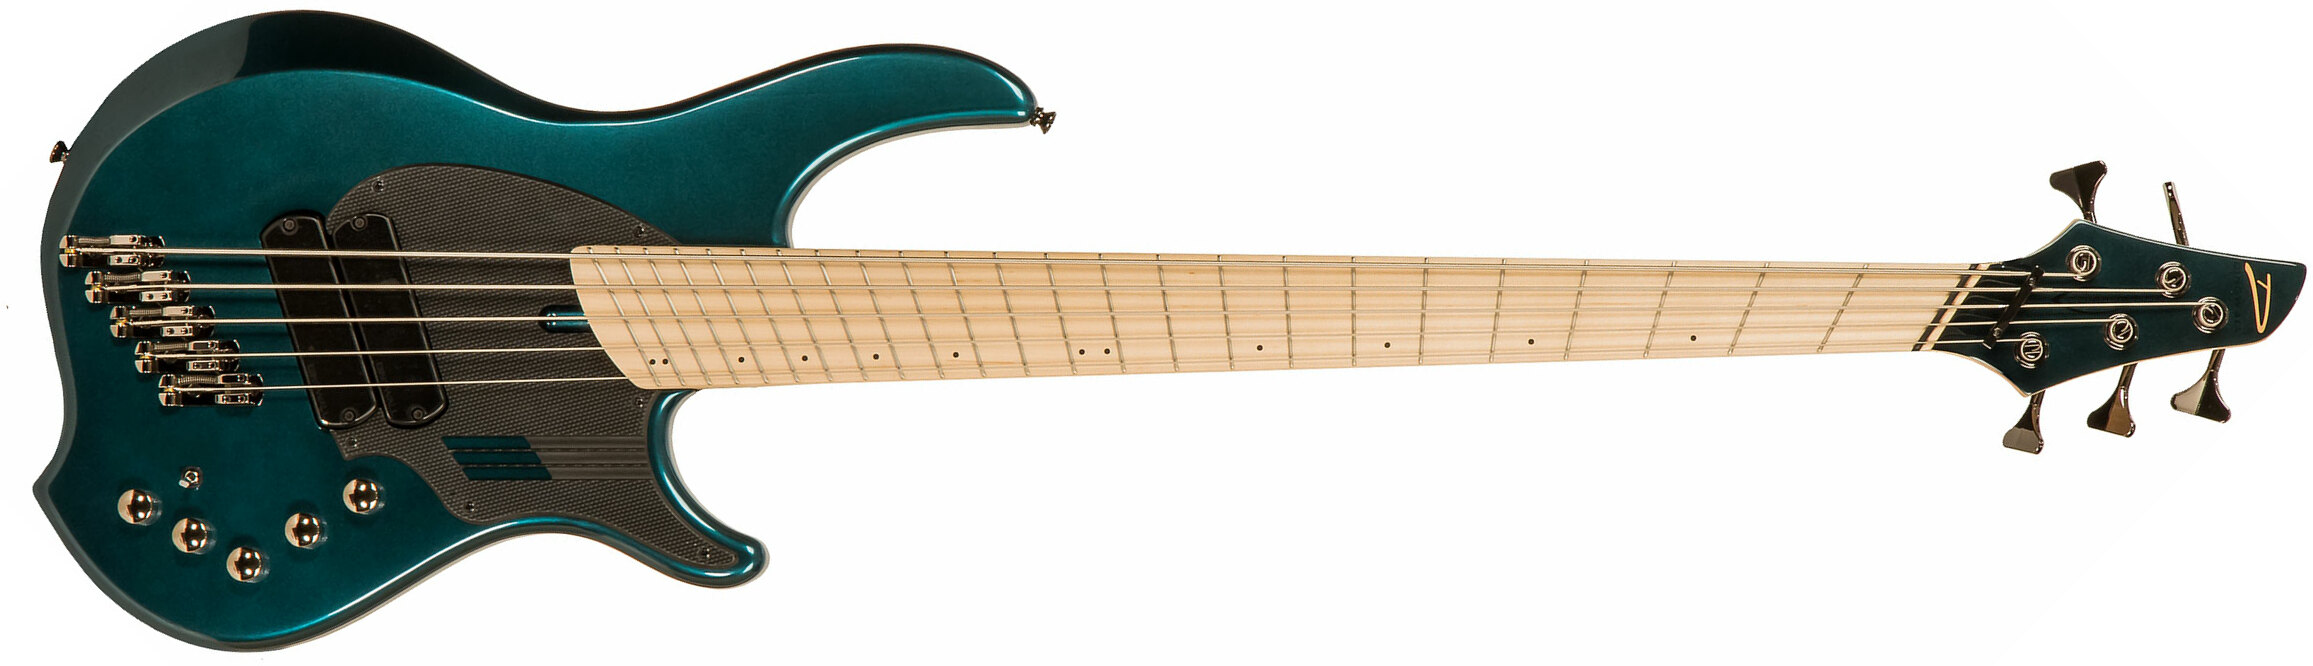 Dingwall Adam Nolly Getgood Ng2 5c Signature 2pu Active Mn - Black Forrest Green - Basse Électrique Solid Body - Main picture